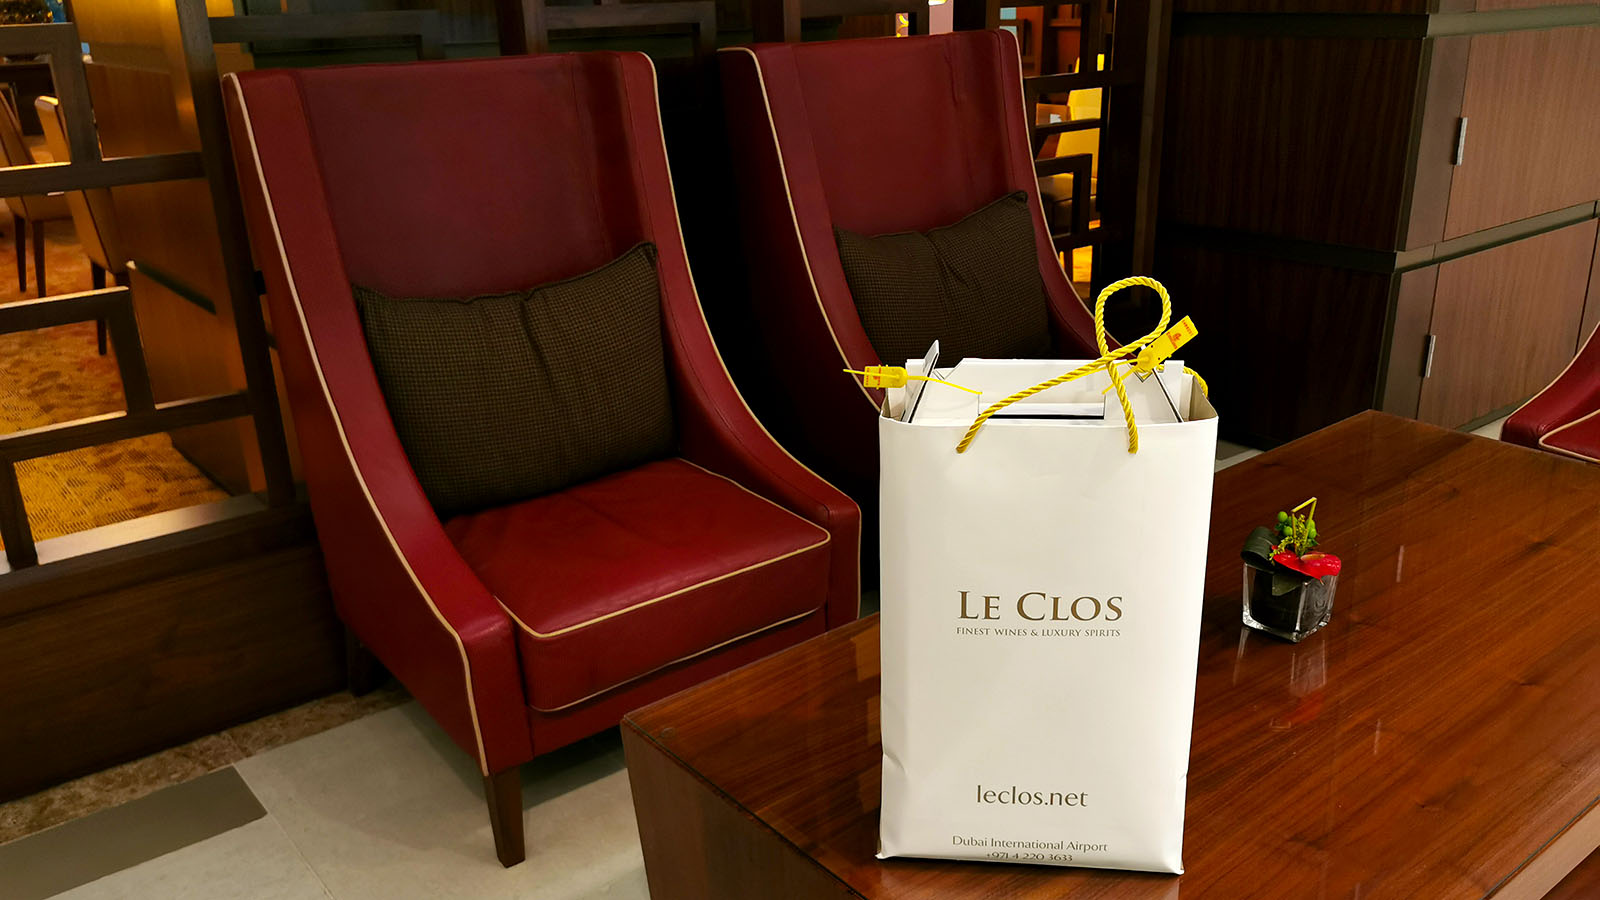 Le Clos shopping bag in the Emirates First Class Lounge in Dubai Concourse A